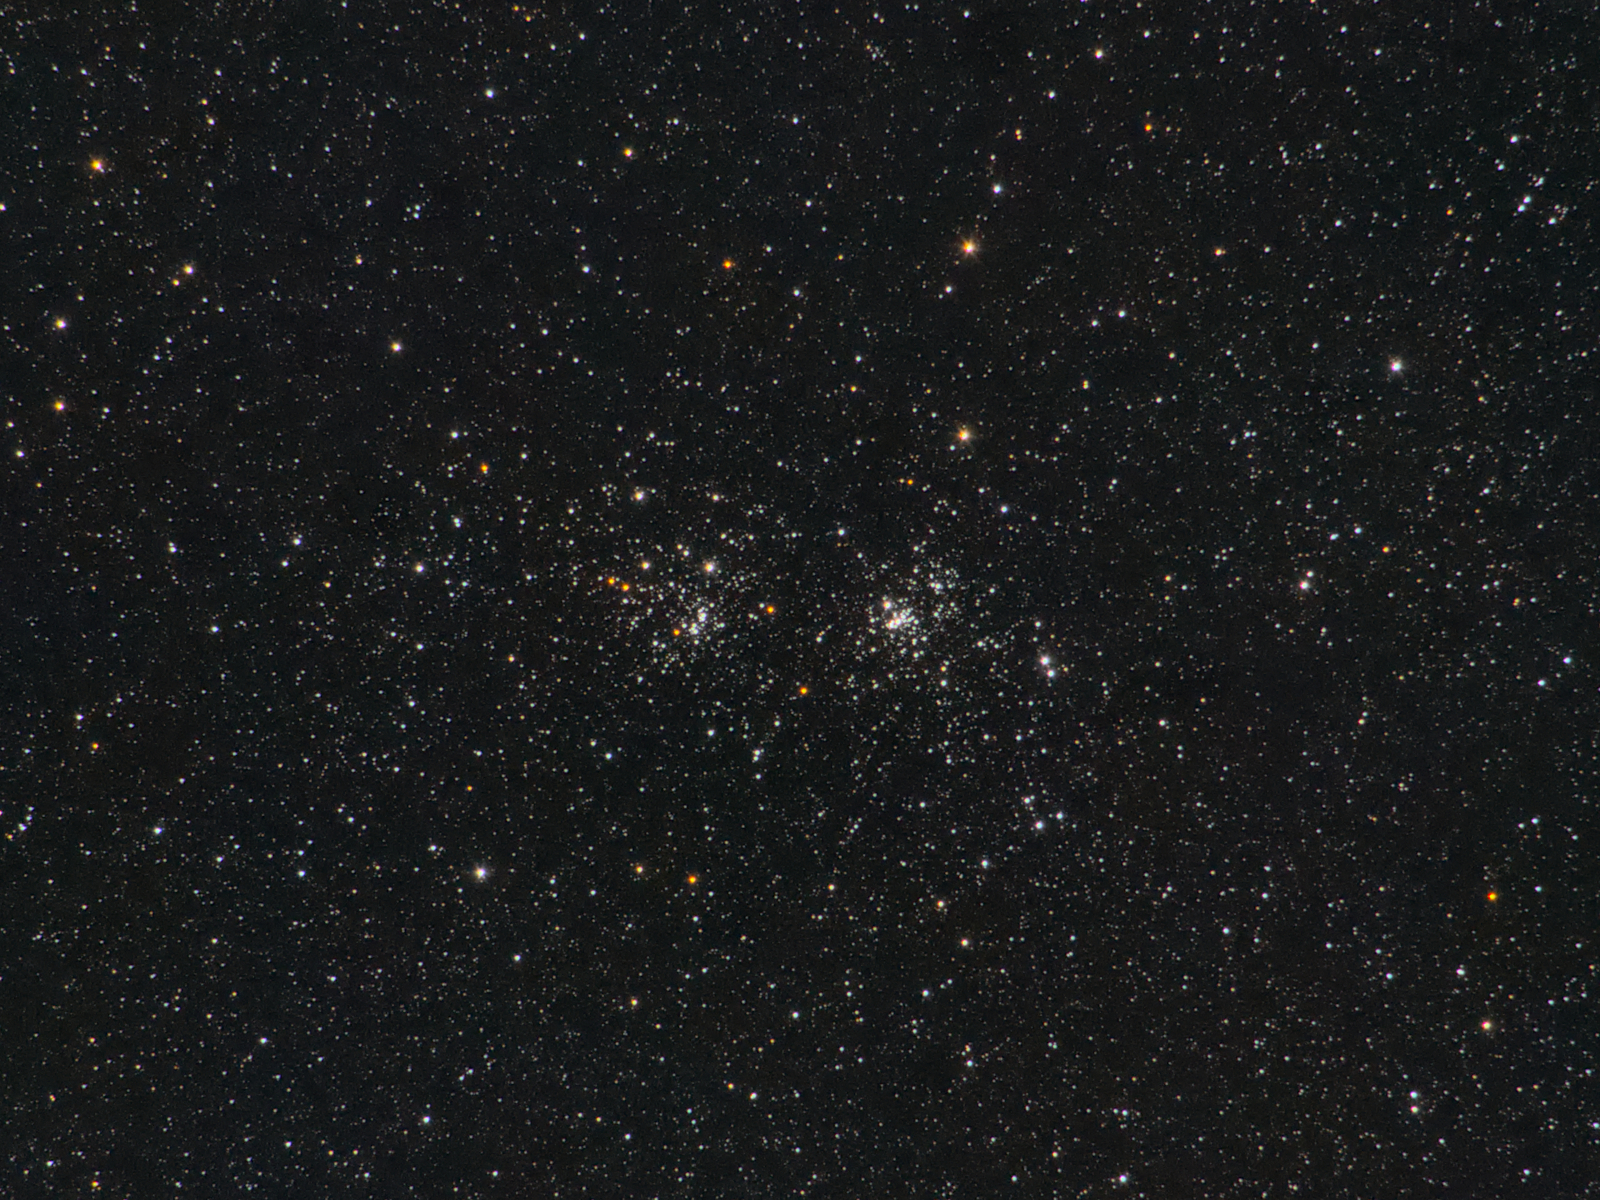 NGC 869 and 884 (Double Cluster)